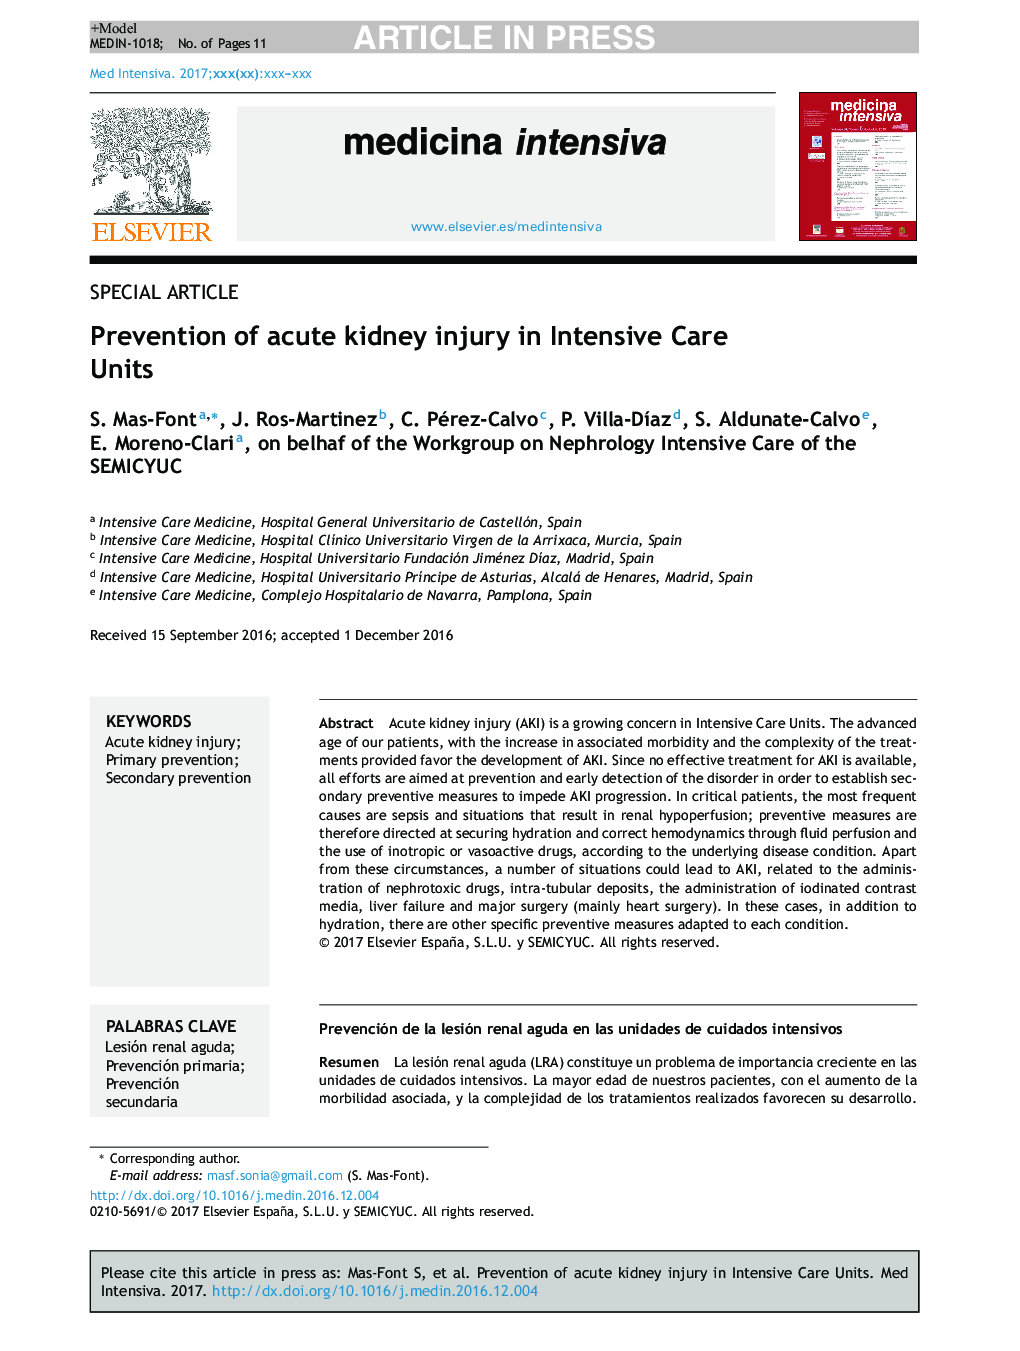 Prevention of acute kidney injury in Intensive Care Units